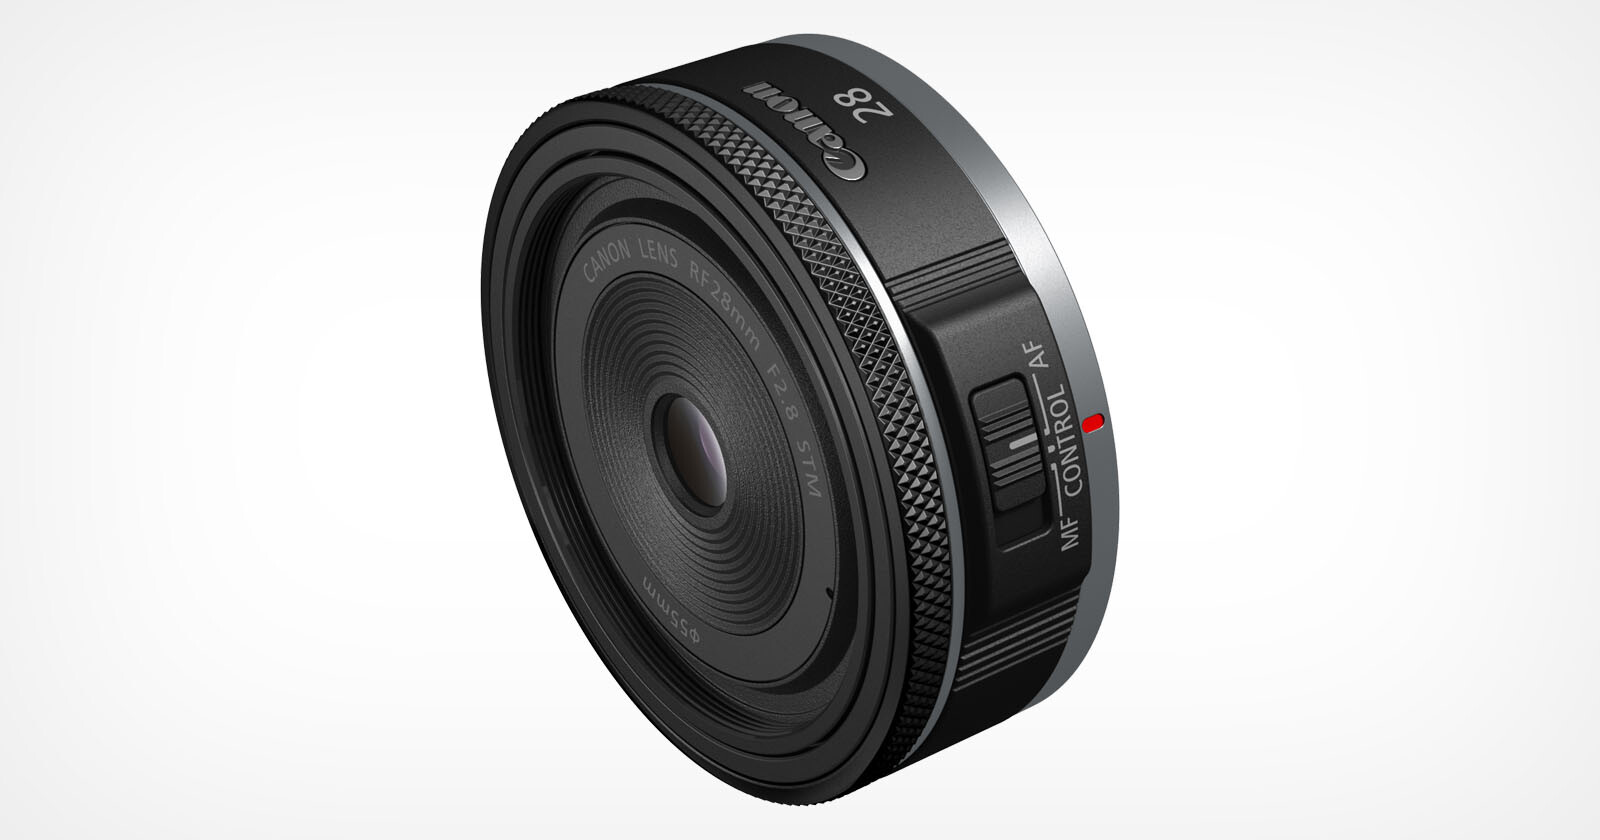 Canons 28mm f/2.8 is a New Pancake Lens for RF-Mount